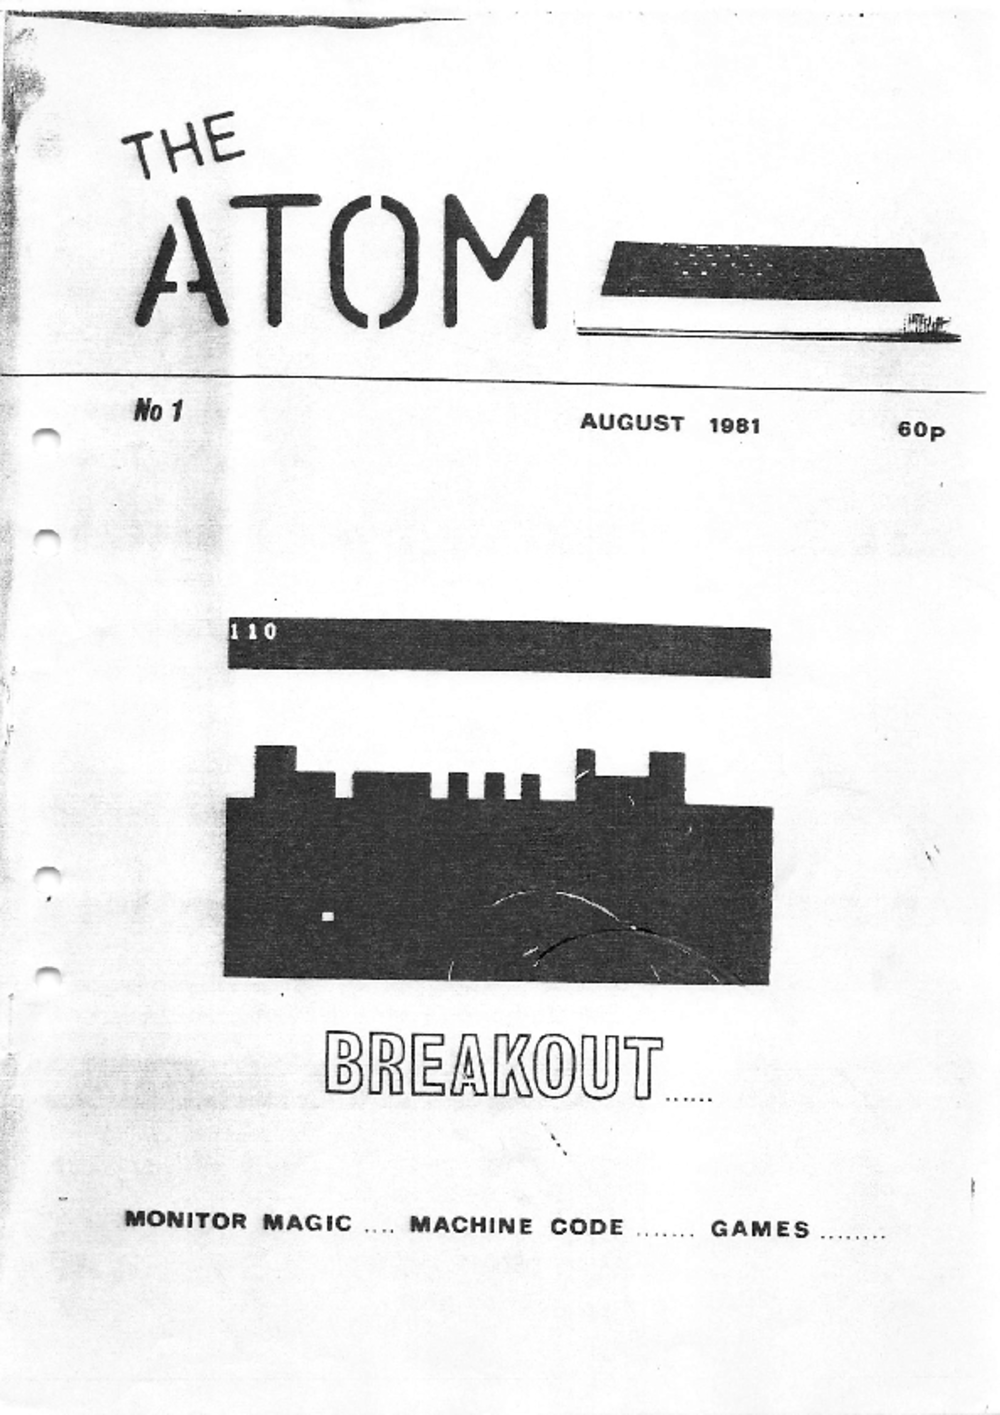 Article: The Atom - August 1981 - No 1